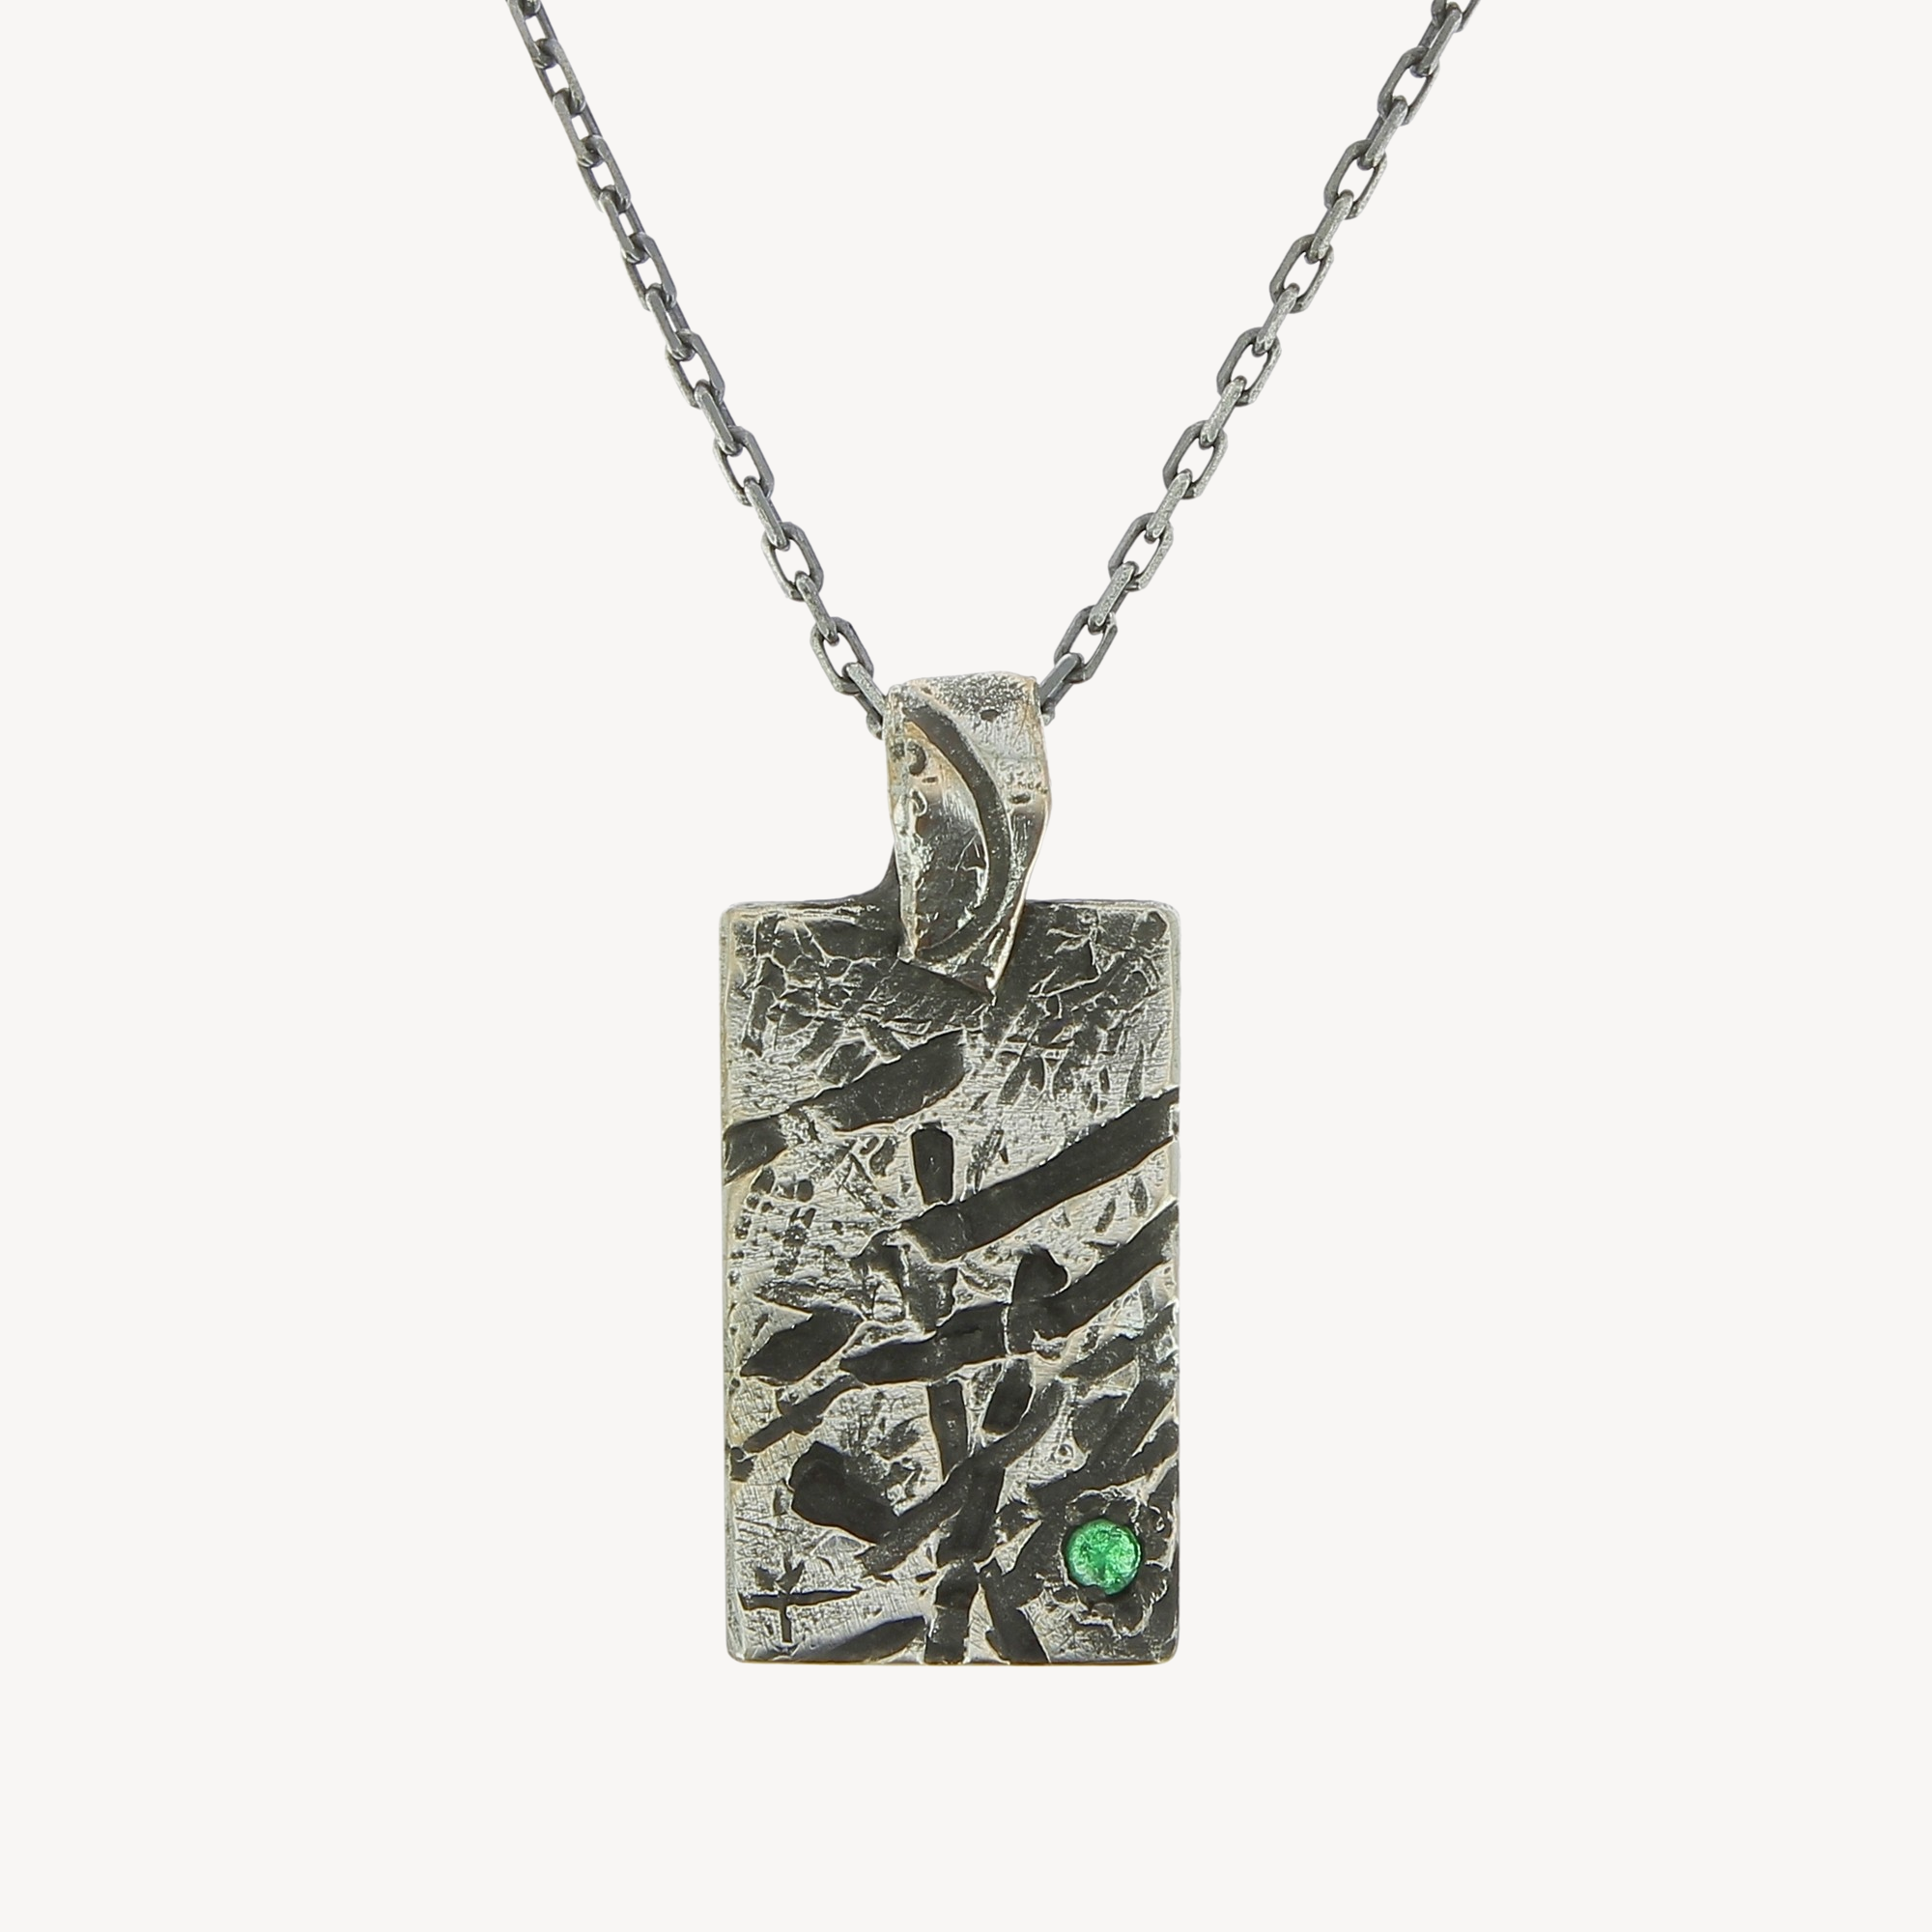 Scratched plate necklace 1 emerald